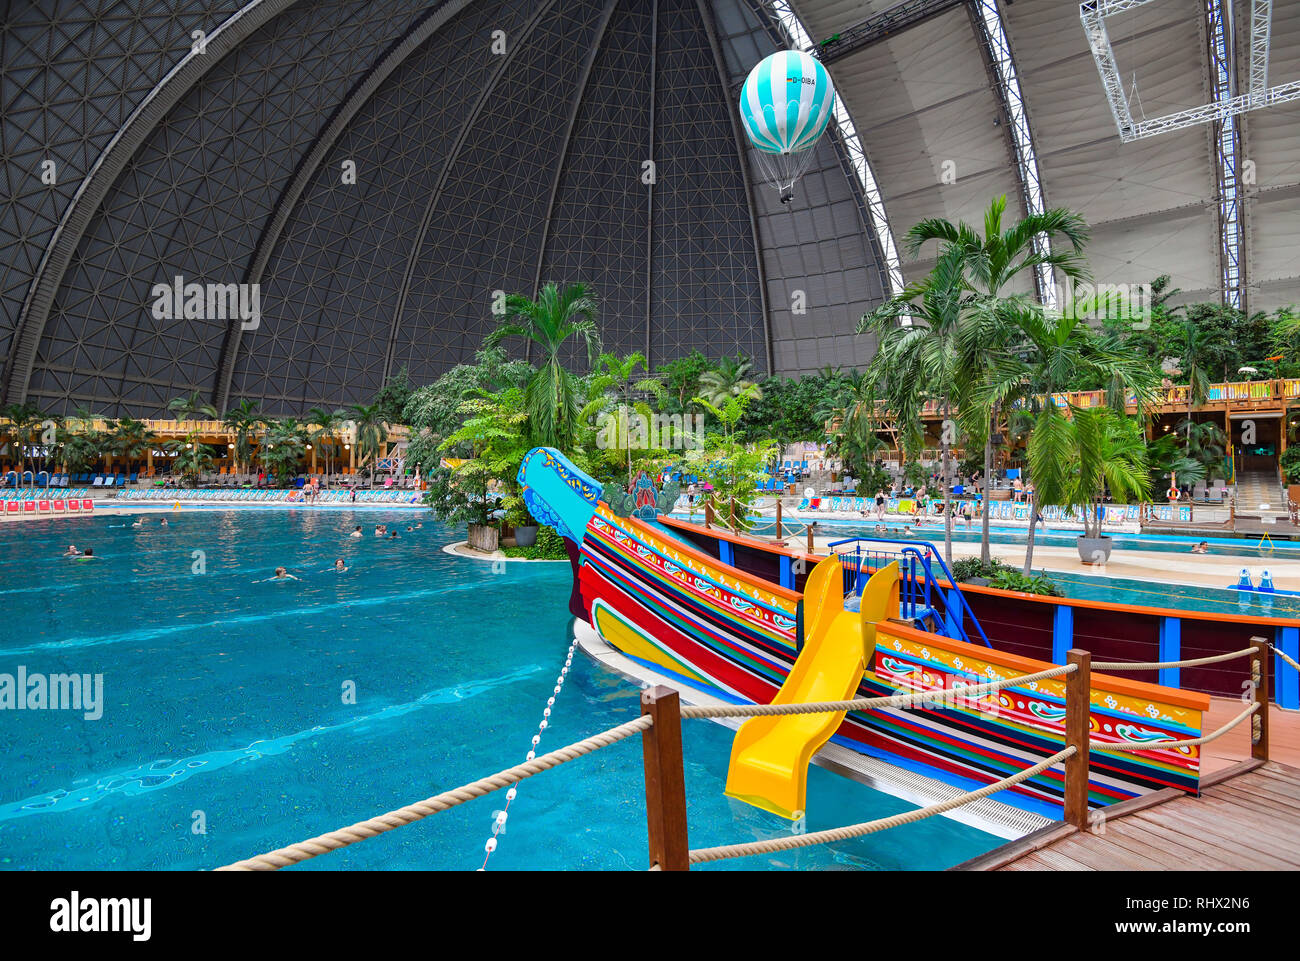 01 February 2019, Brandenburg, Krausnick: View into the tropical theme park of Tropical Islands. In 2018, around 1.2 million people visited the amusement park. Since 2004 it has been located in the former Cargolifter shipyard hall, which is considered the largest self-supporting hall in the world. Most of the visitors come from Germany, Poland, the Czech Republic, Denmark and the Netherlands. Tropical Island employs about 640 people. In addition, there are another 100 external employees. ATTENTION: For editorial use only in connection with reporting on Tropical Islands. Release exclusively for Stock Photo